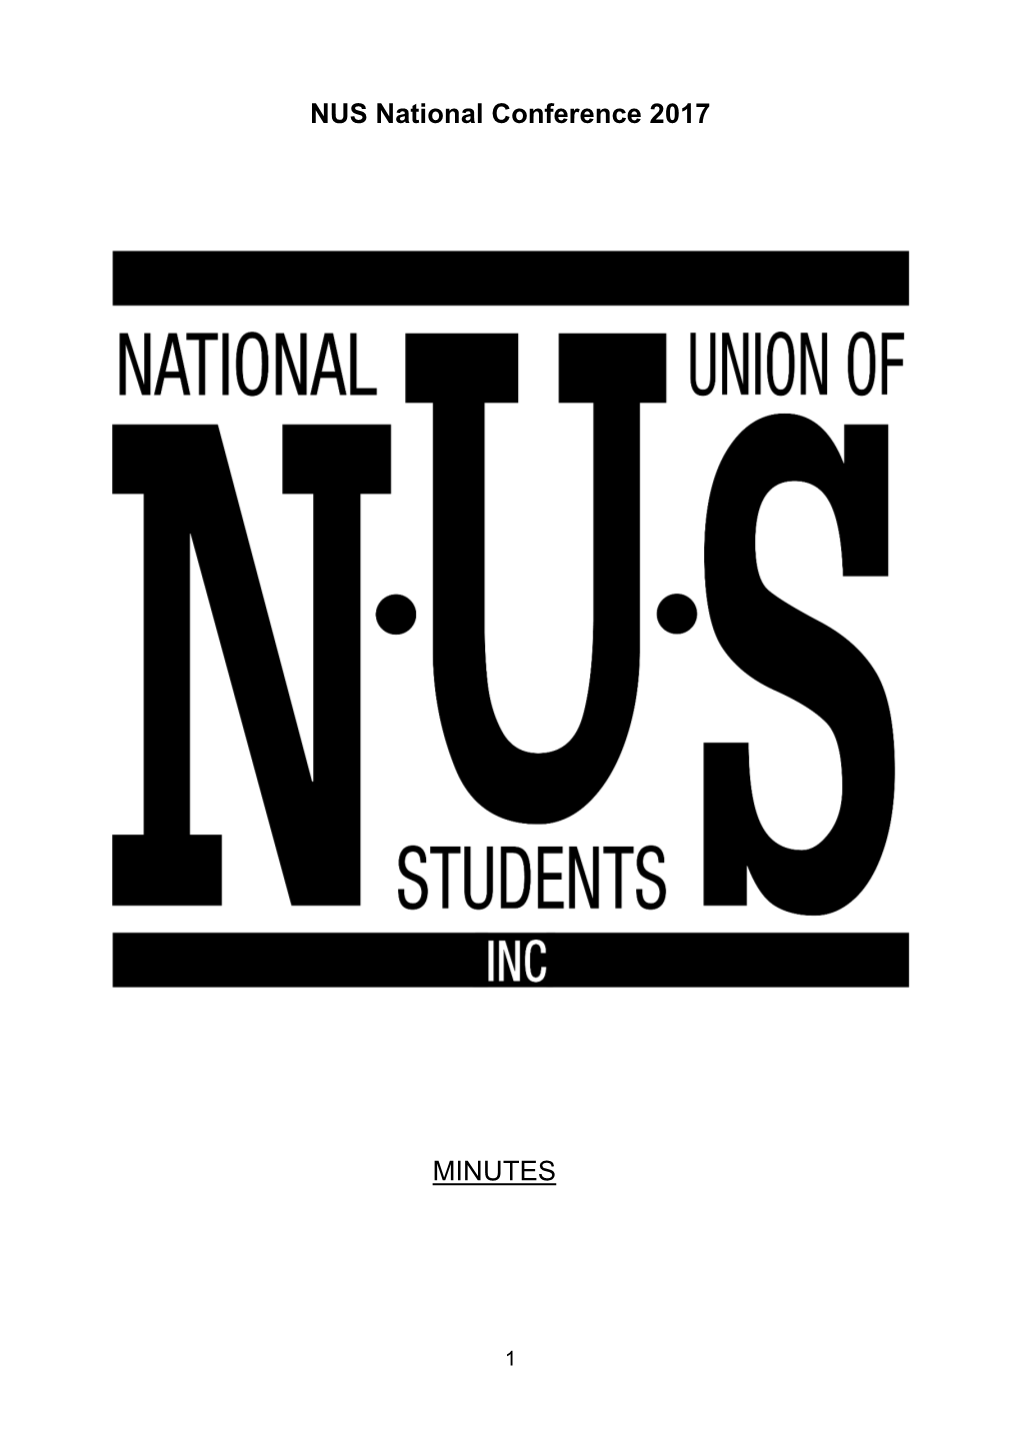 NUS National Conference 2017 MINUTES